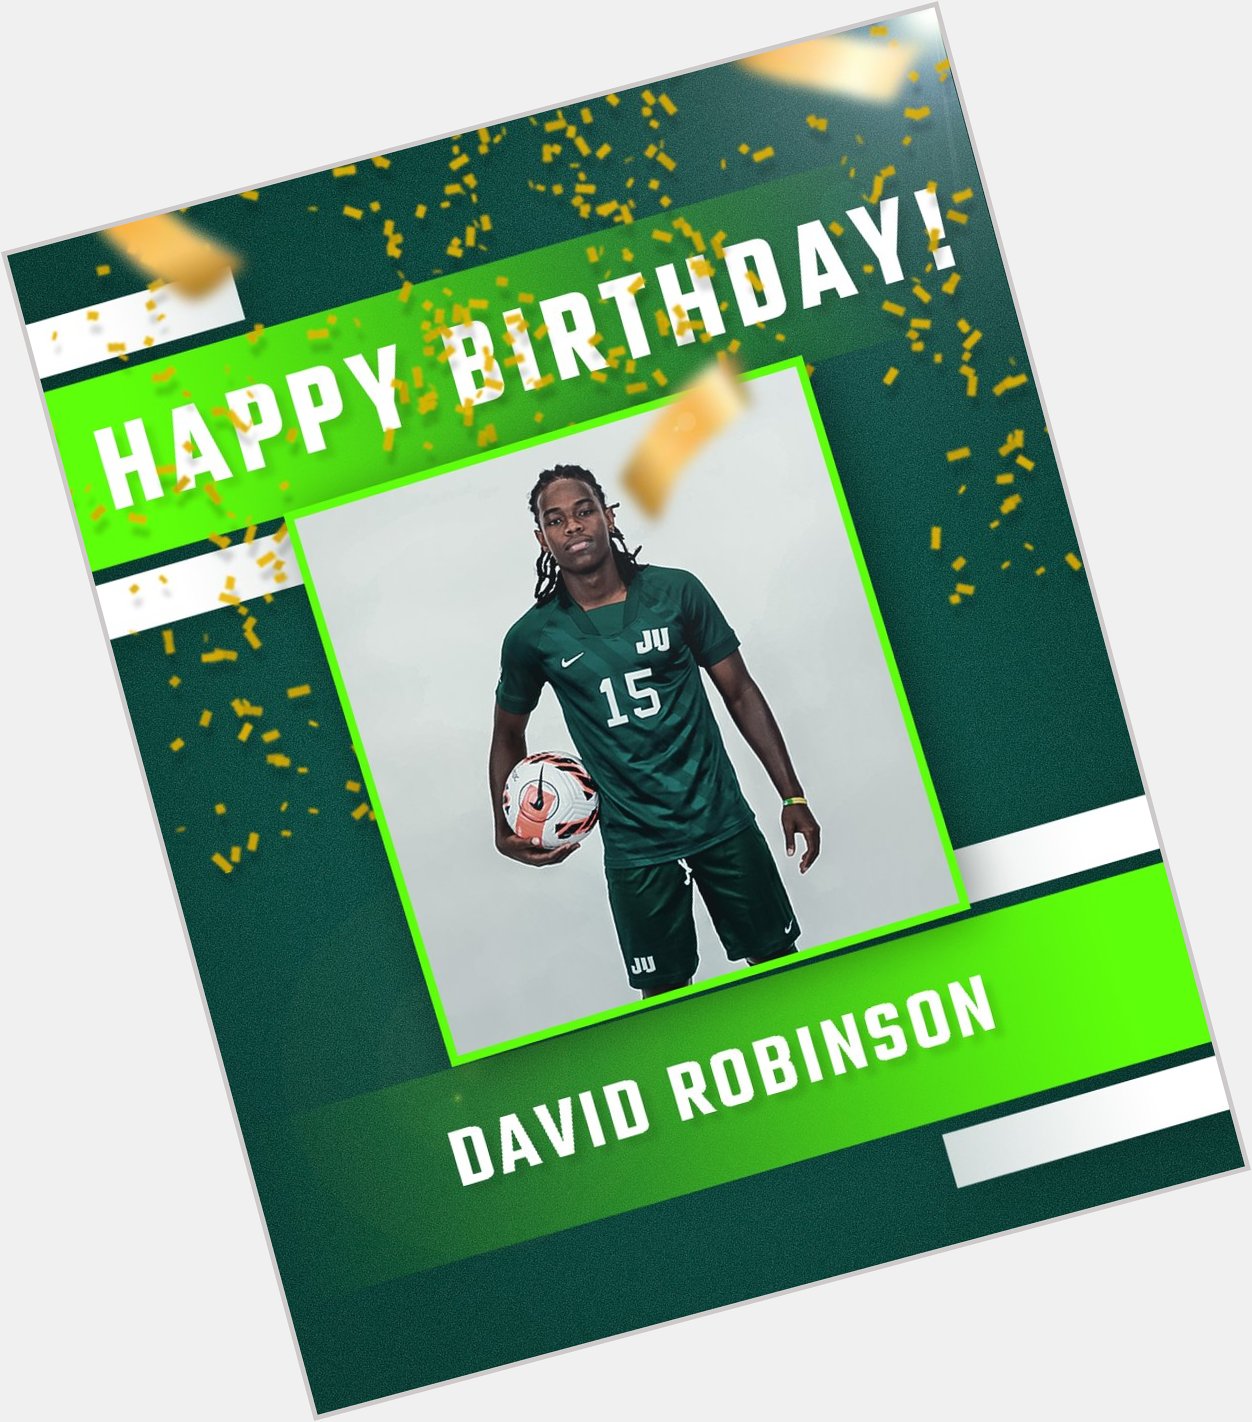 Please join us in wishing a very happy birthday to one of our newest \Phins, David Robinson!  x 